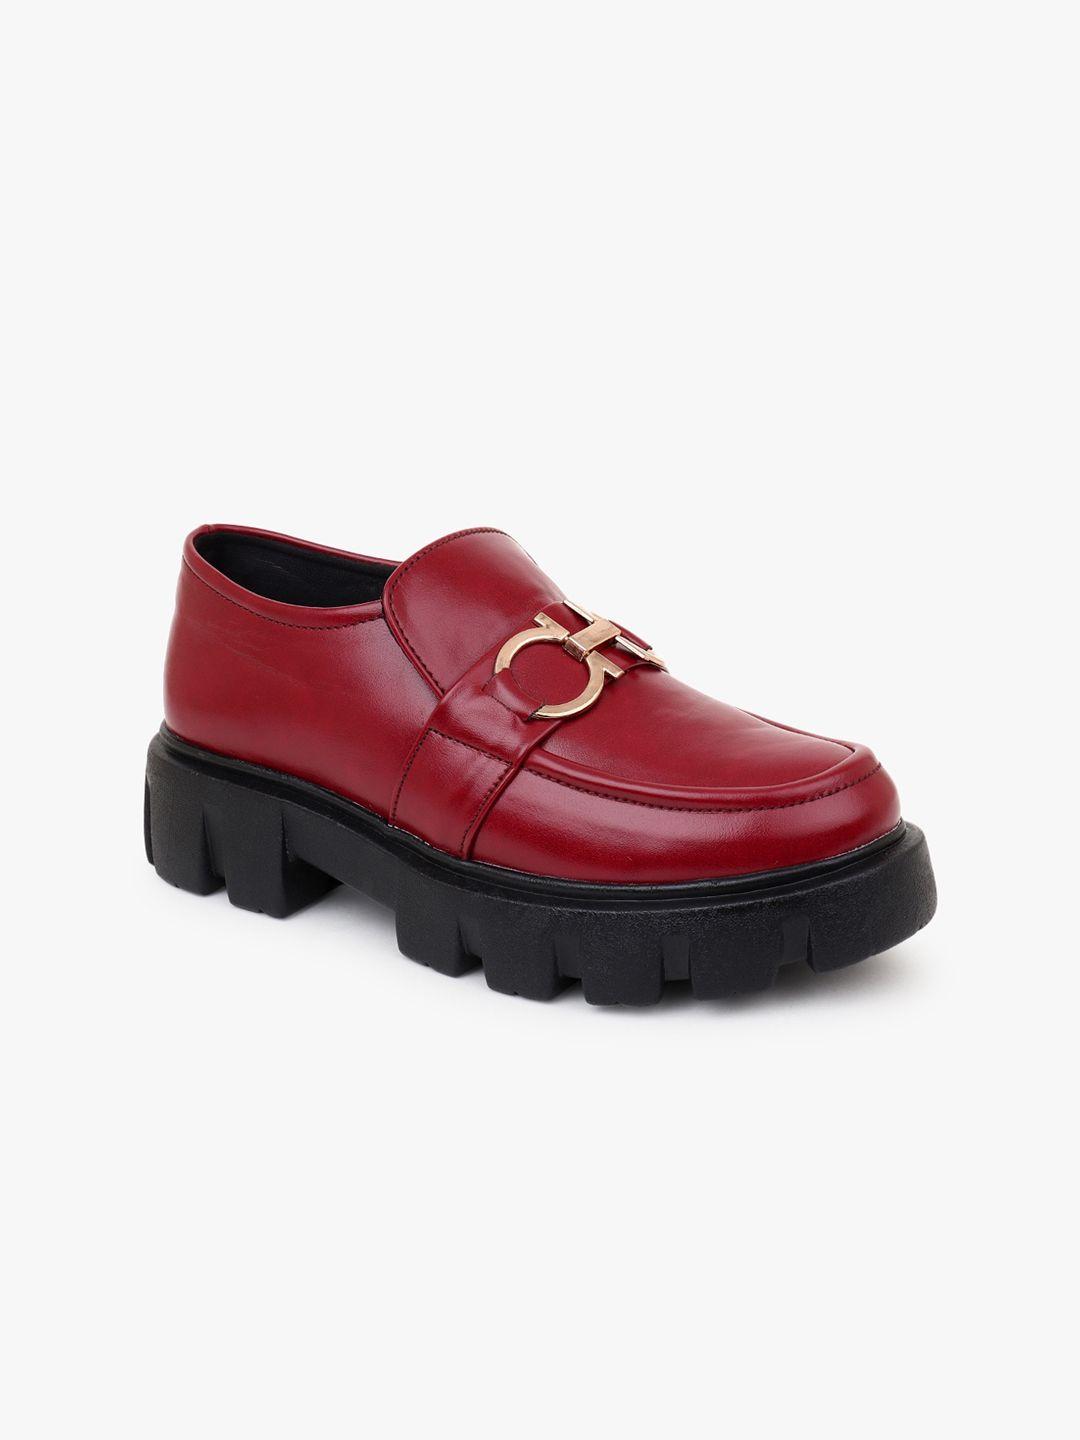 the roadster lifestyle co. women red & black buckled heeled loafers